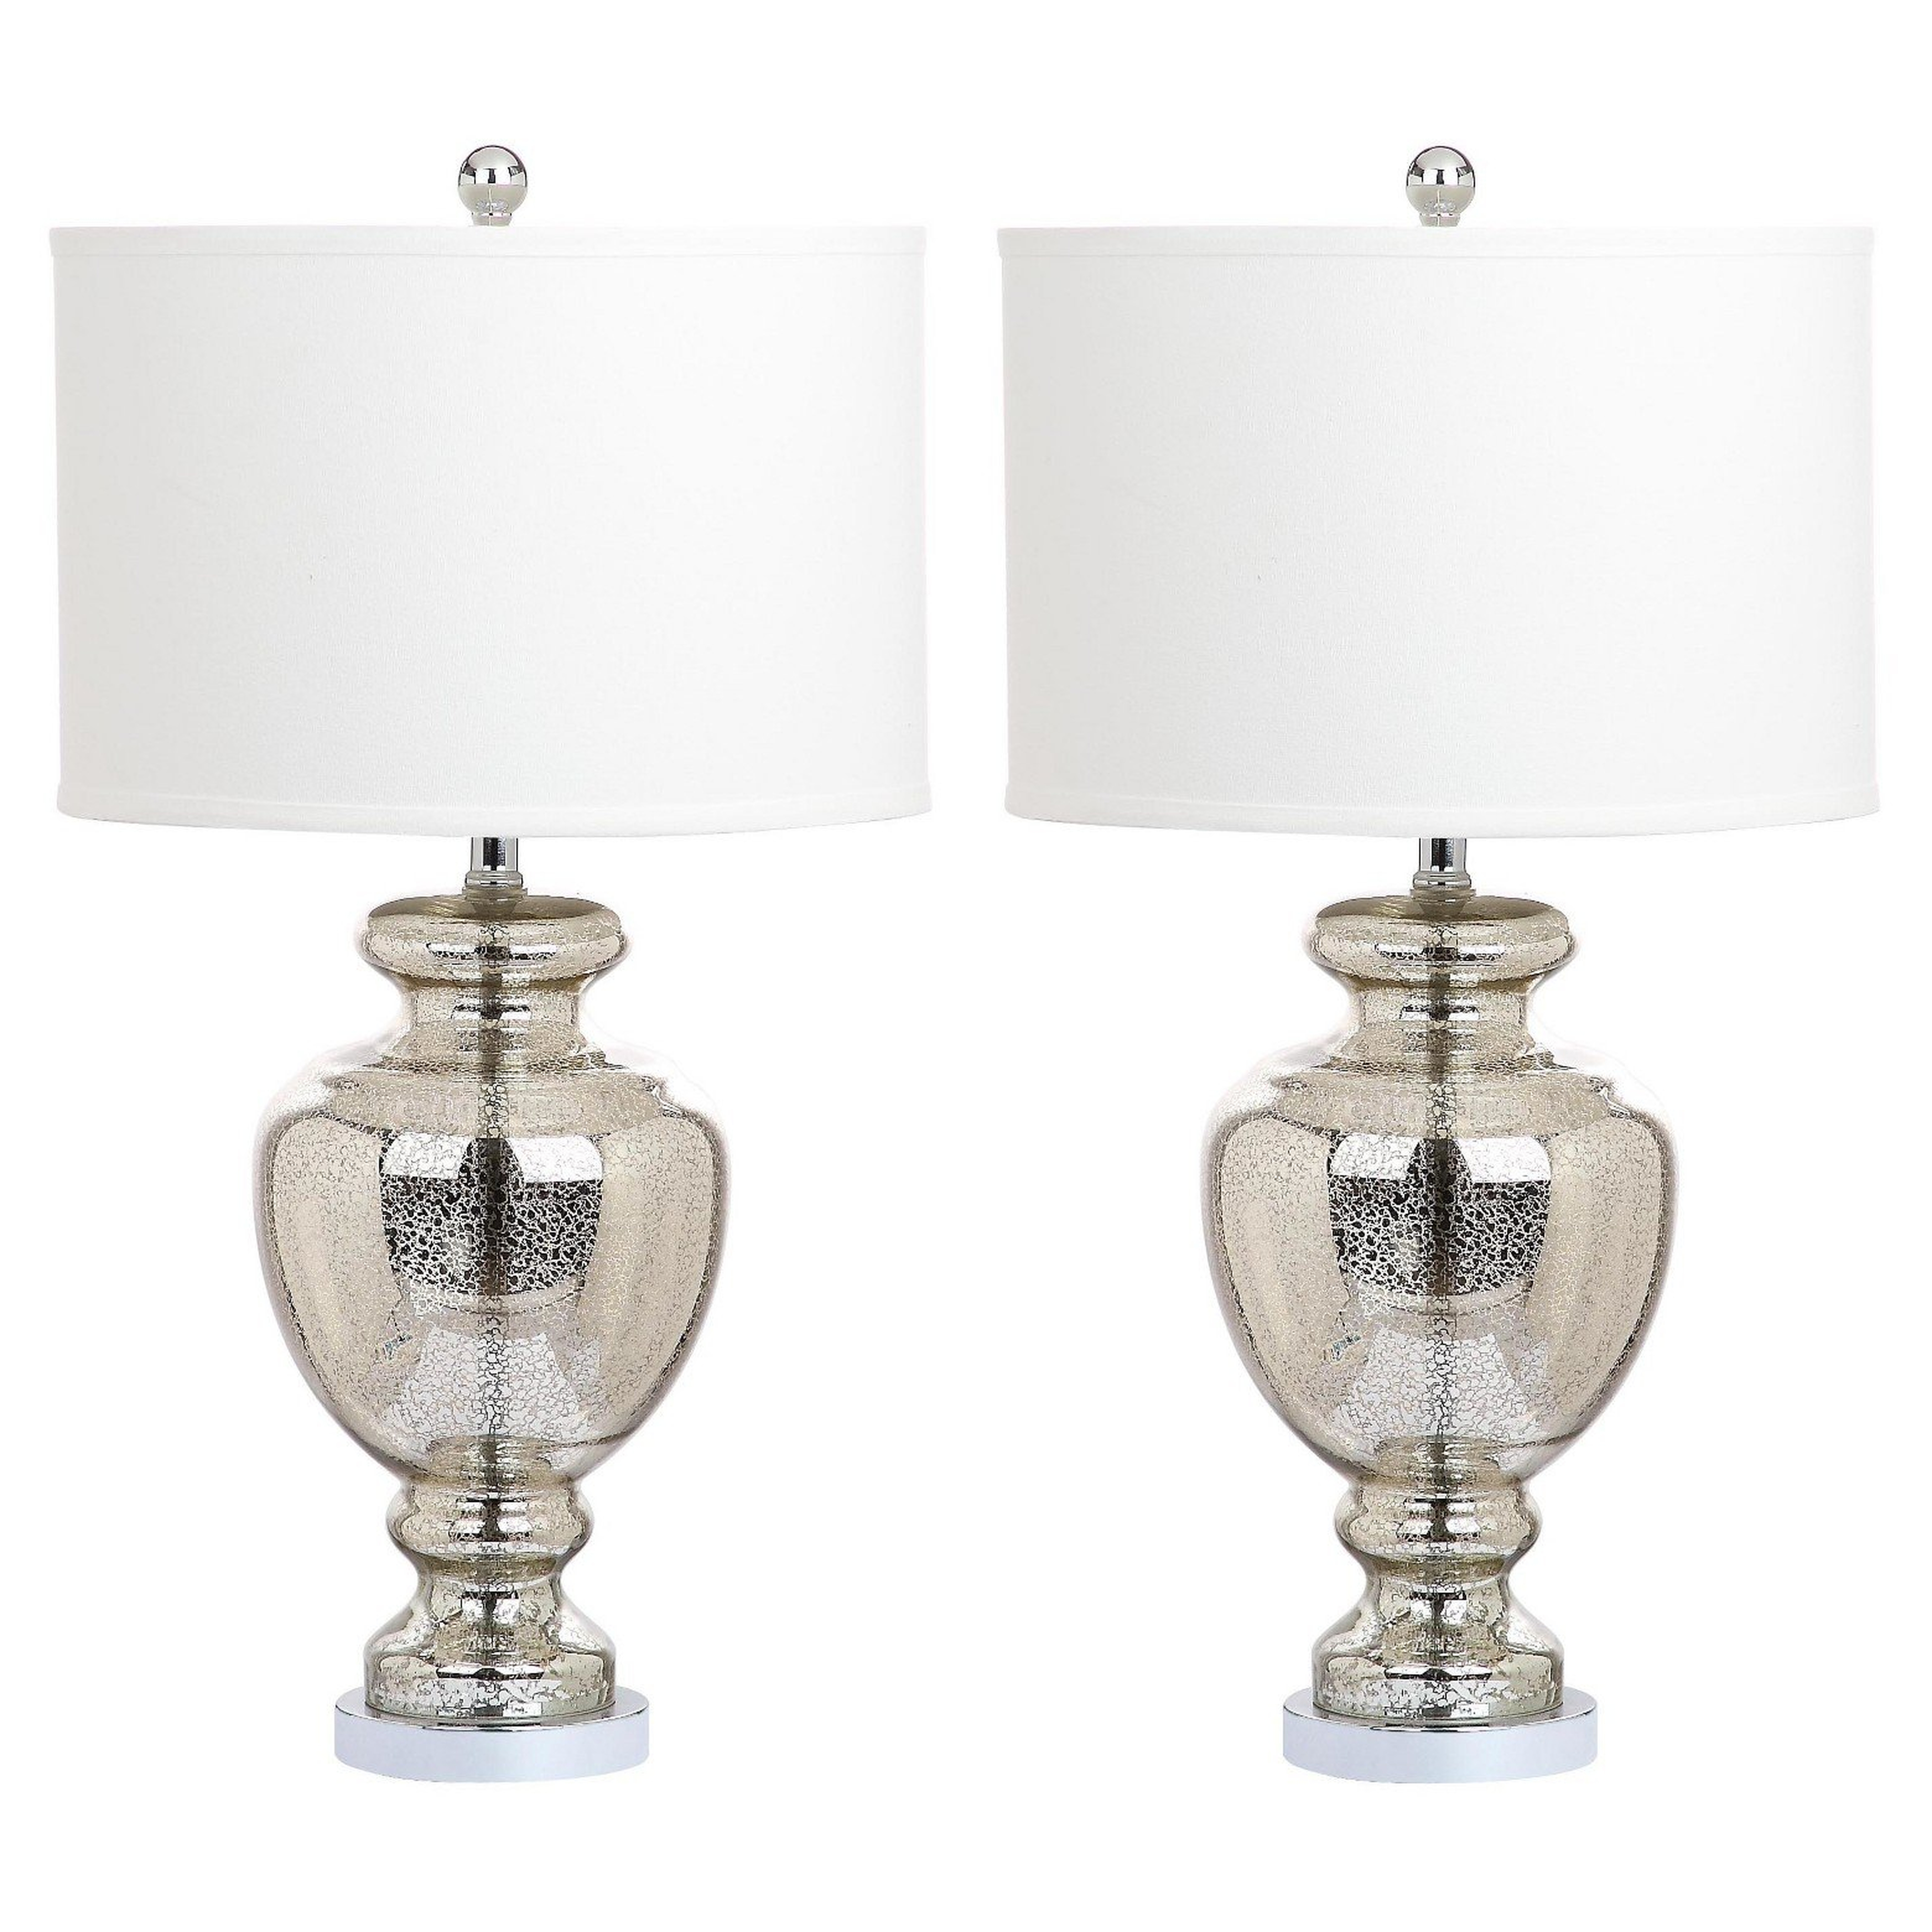 CLEAR GLASS TABLE LAMP - Set of 2 - Arlo Home